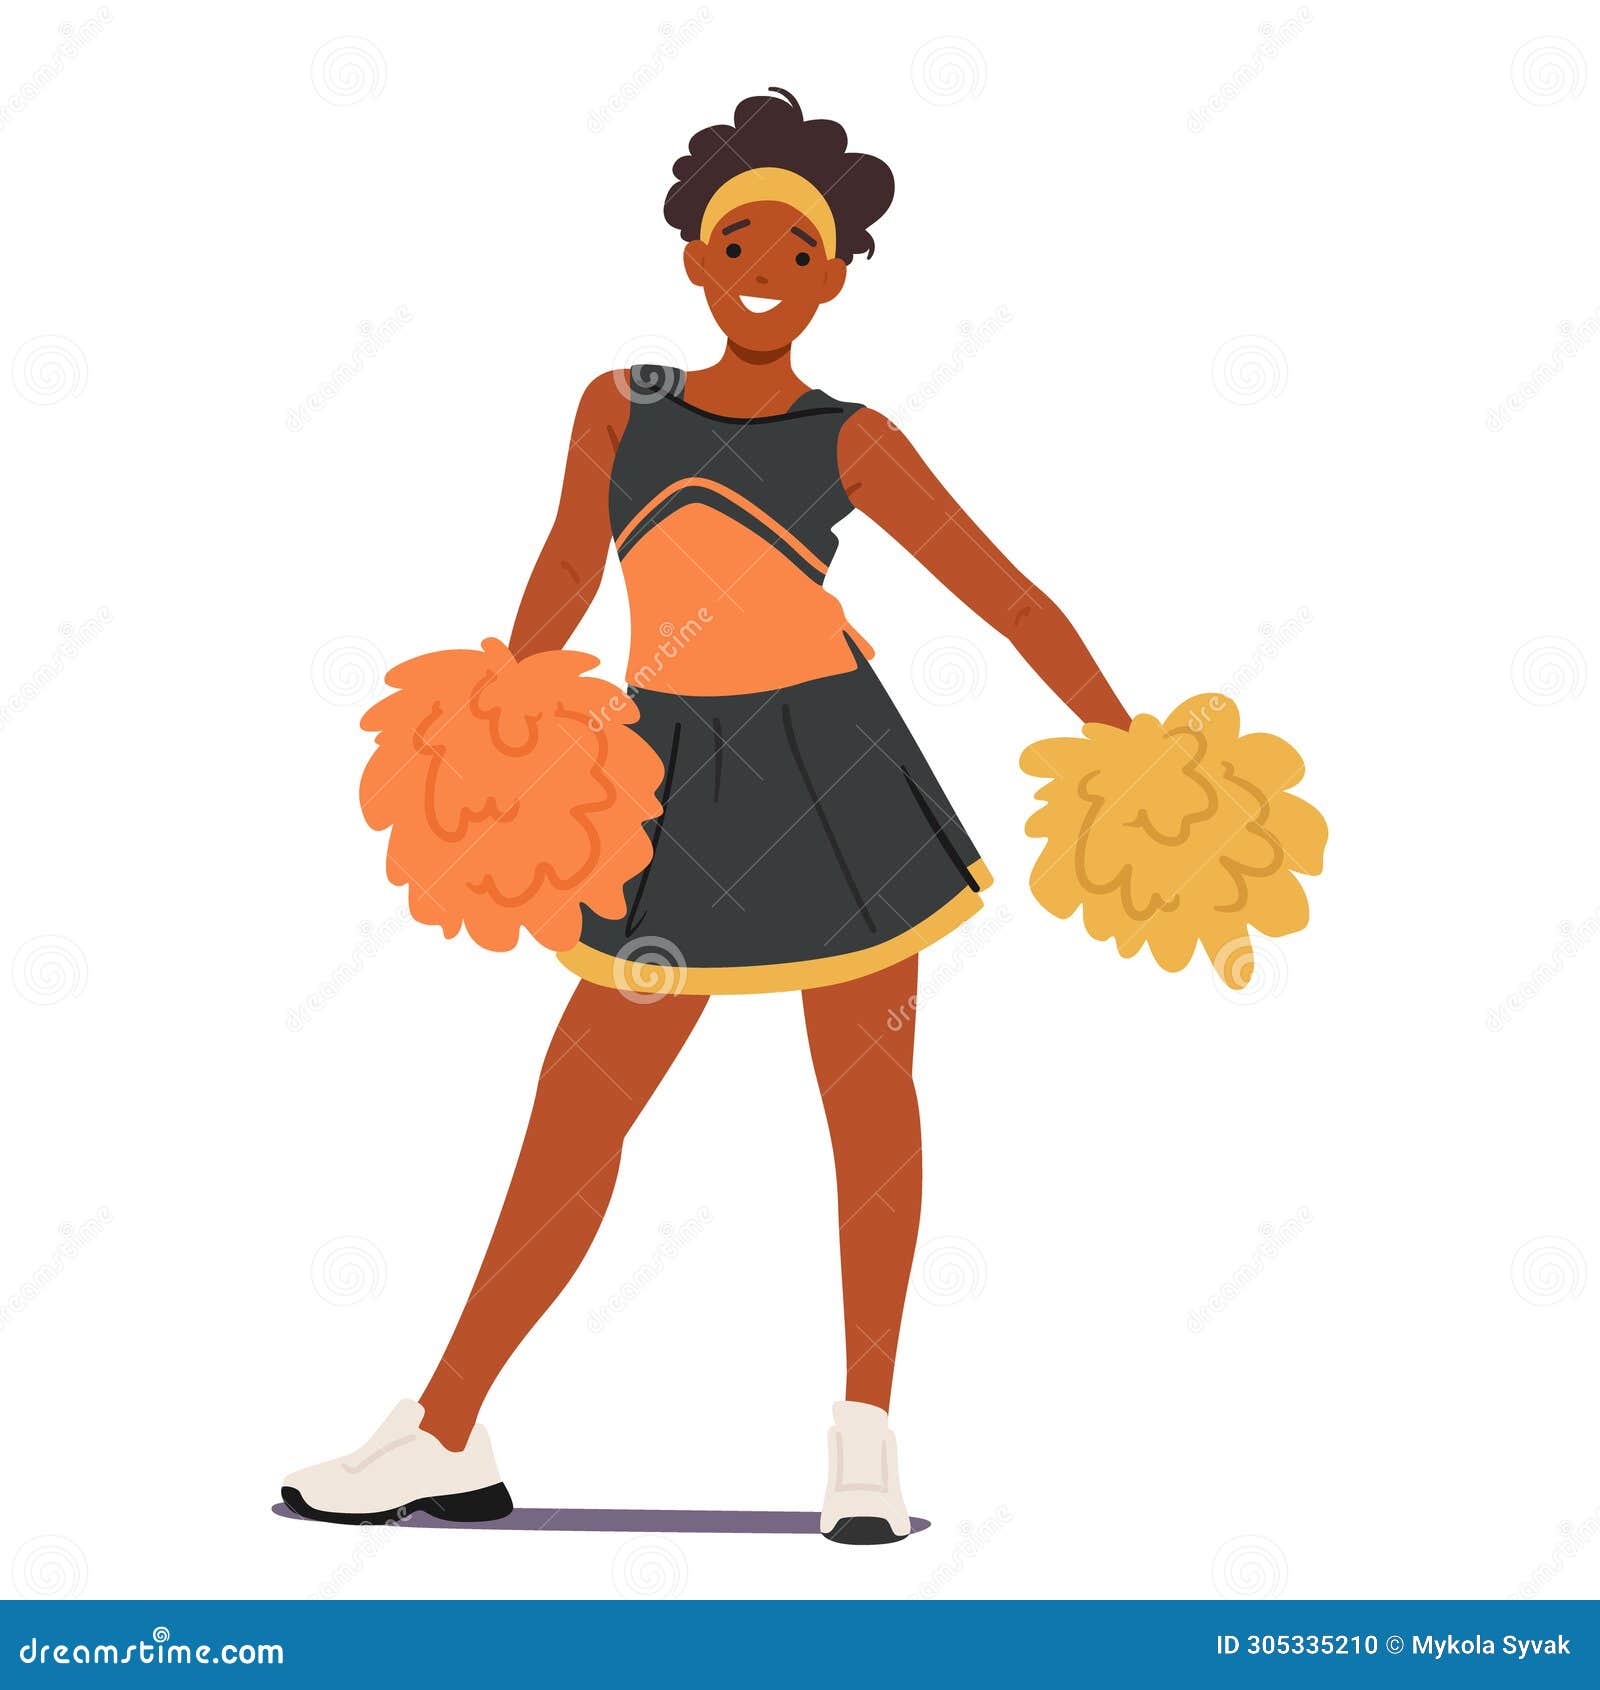 cheerleader girl radiates energy and positivity. with spirited routines, infectious enthusiasm, and a megawatt smile